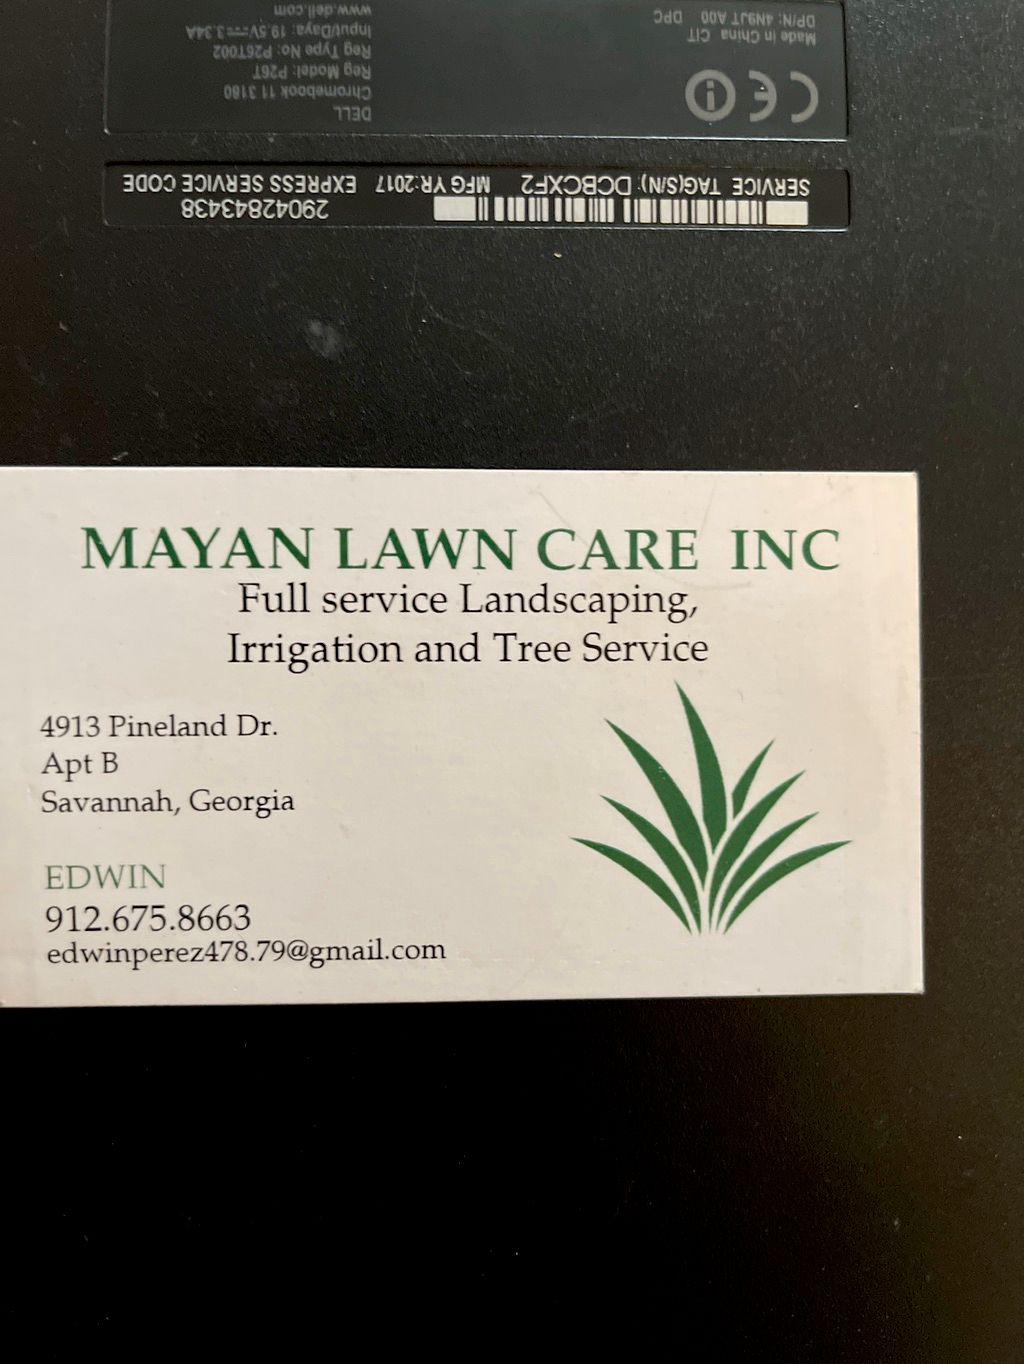 Mayan lawn care & landscaping